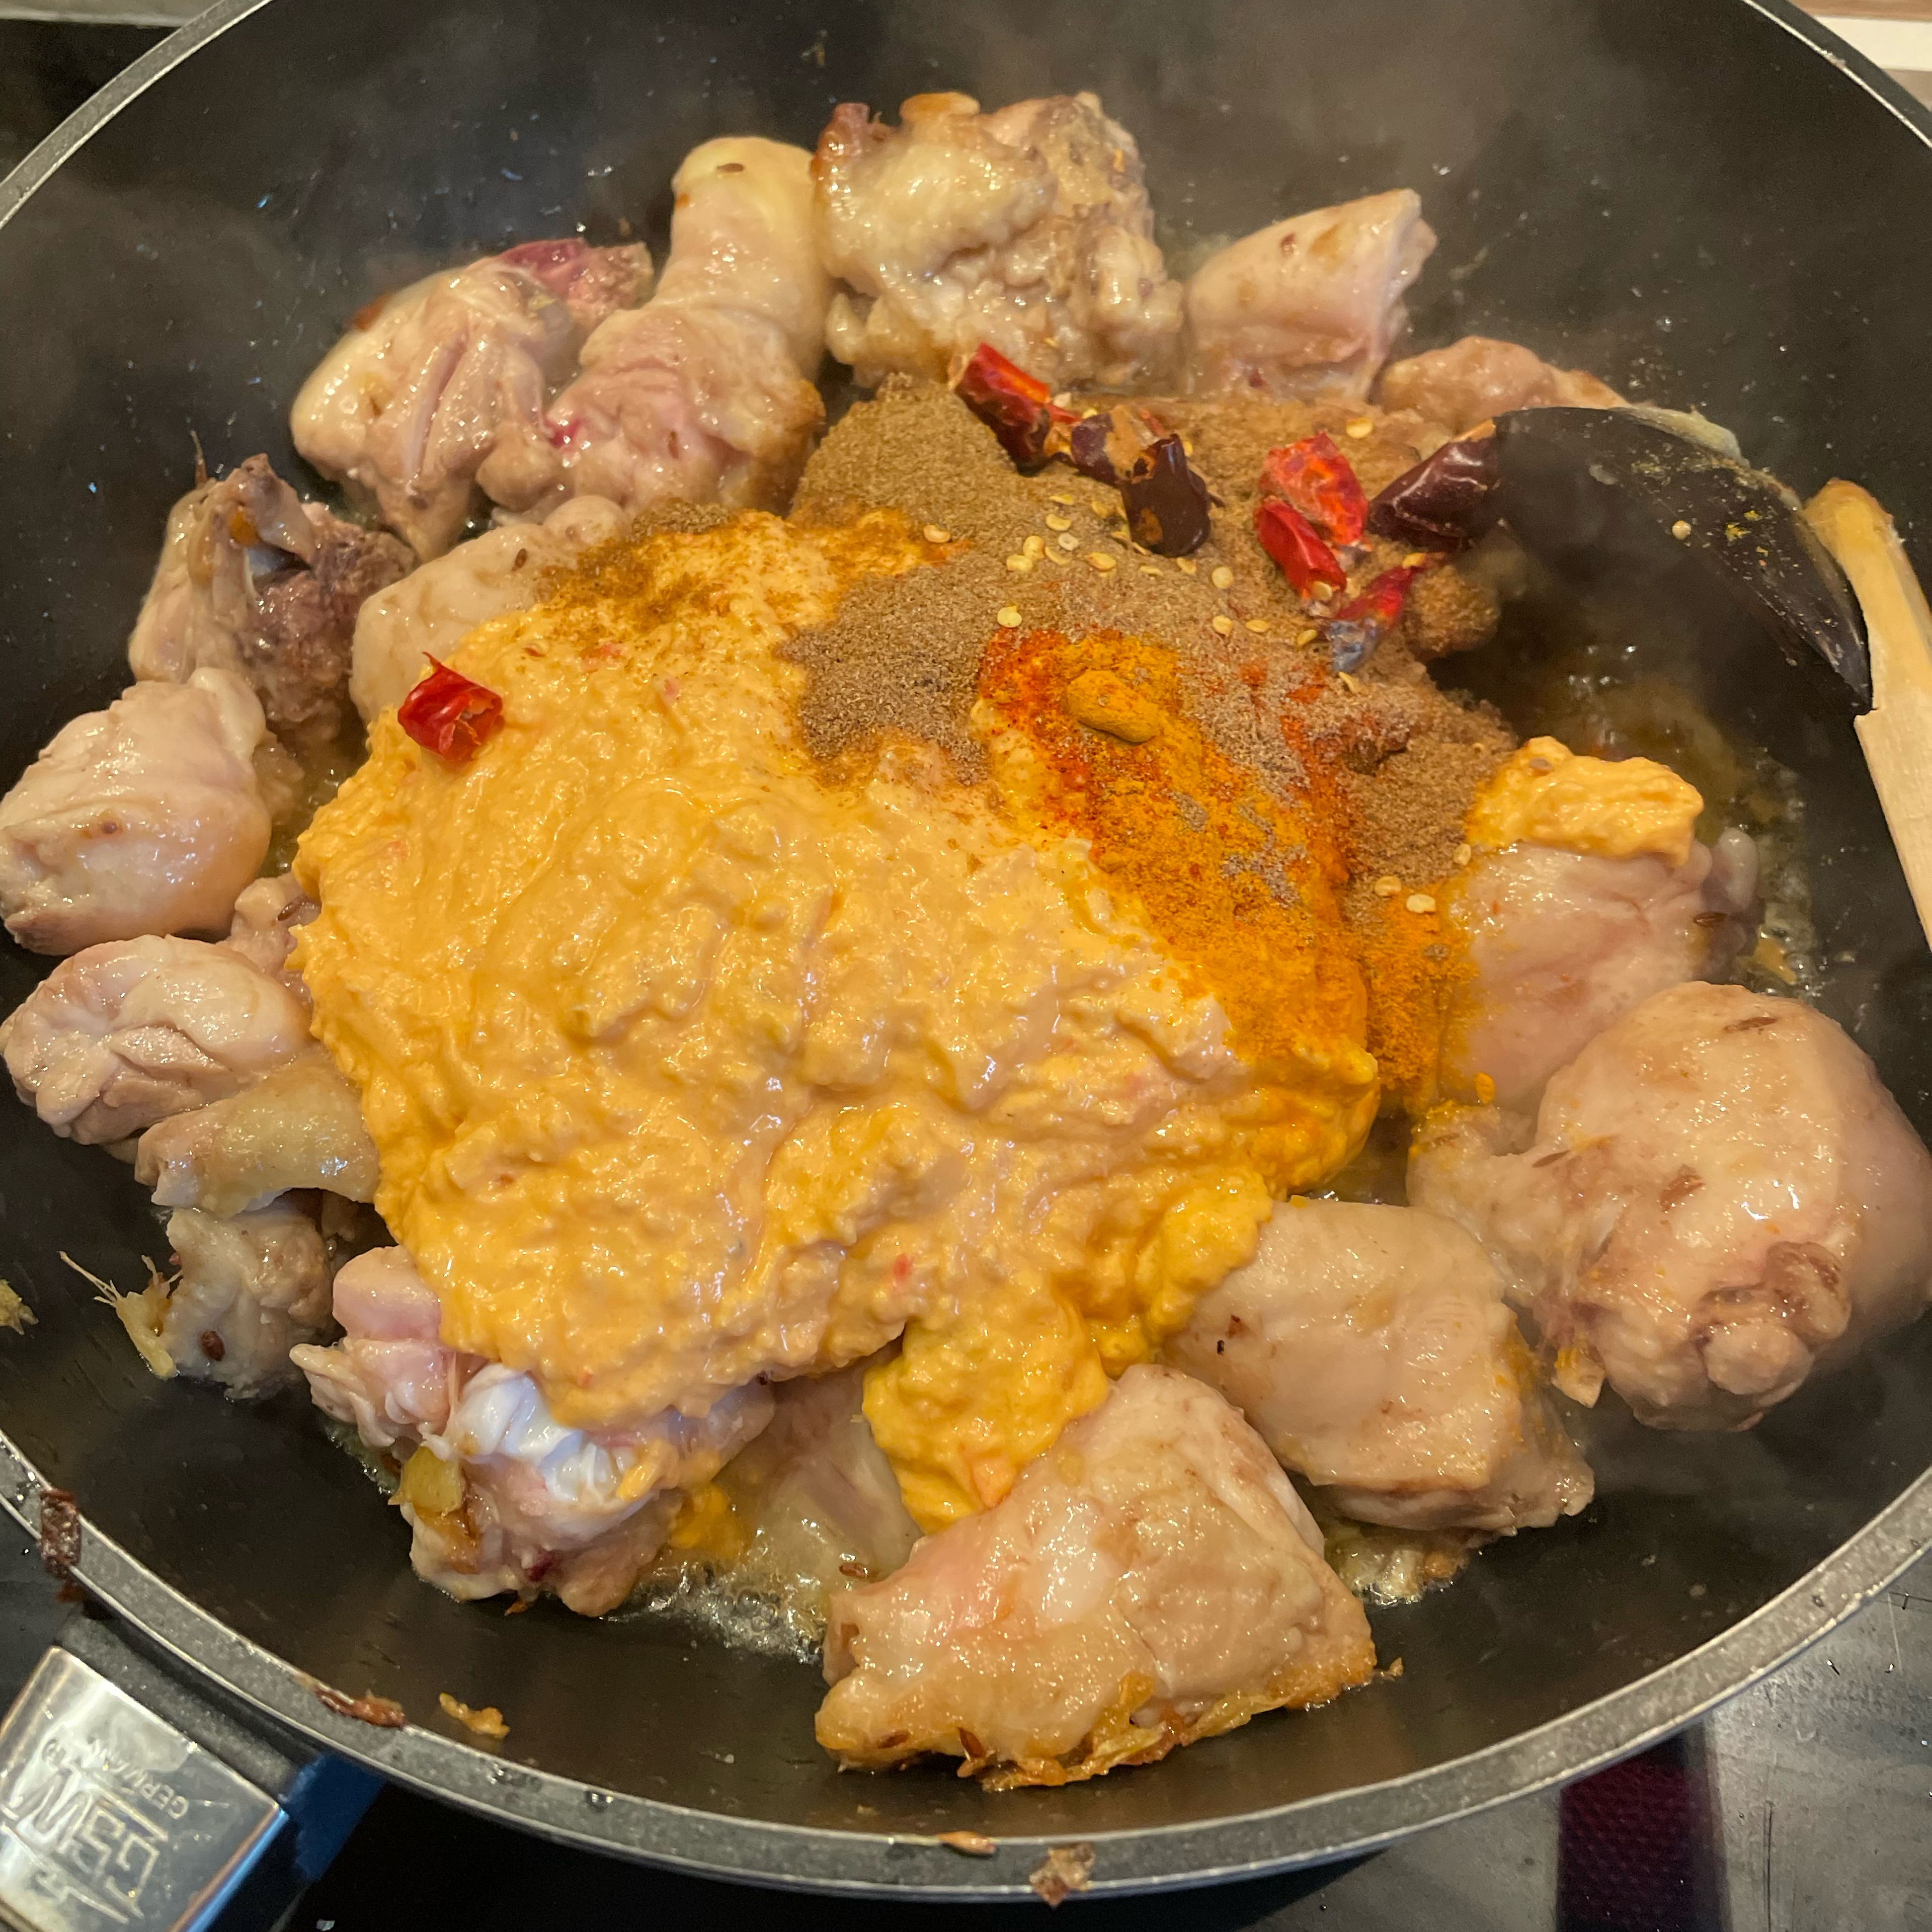 Add the curd mix and the ground spices, mix with the chicken and allow to simmer 2-3 minutes. Cover with a lid and cook on low to medium heat for 15 minutes.